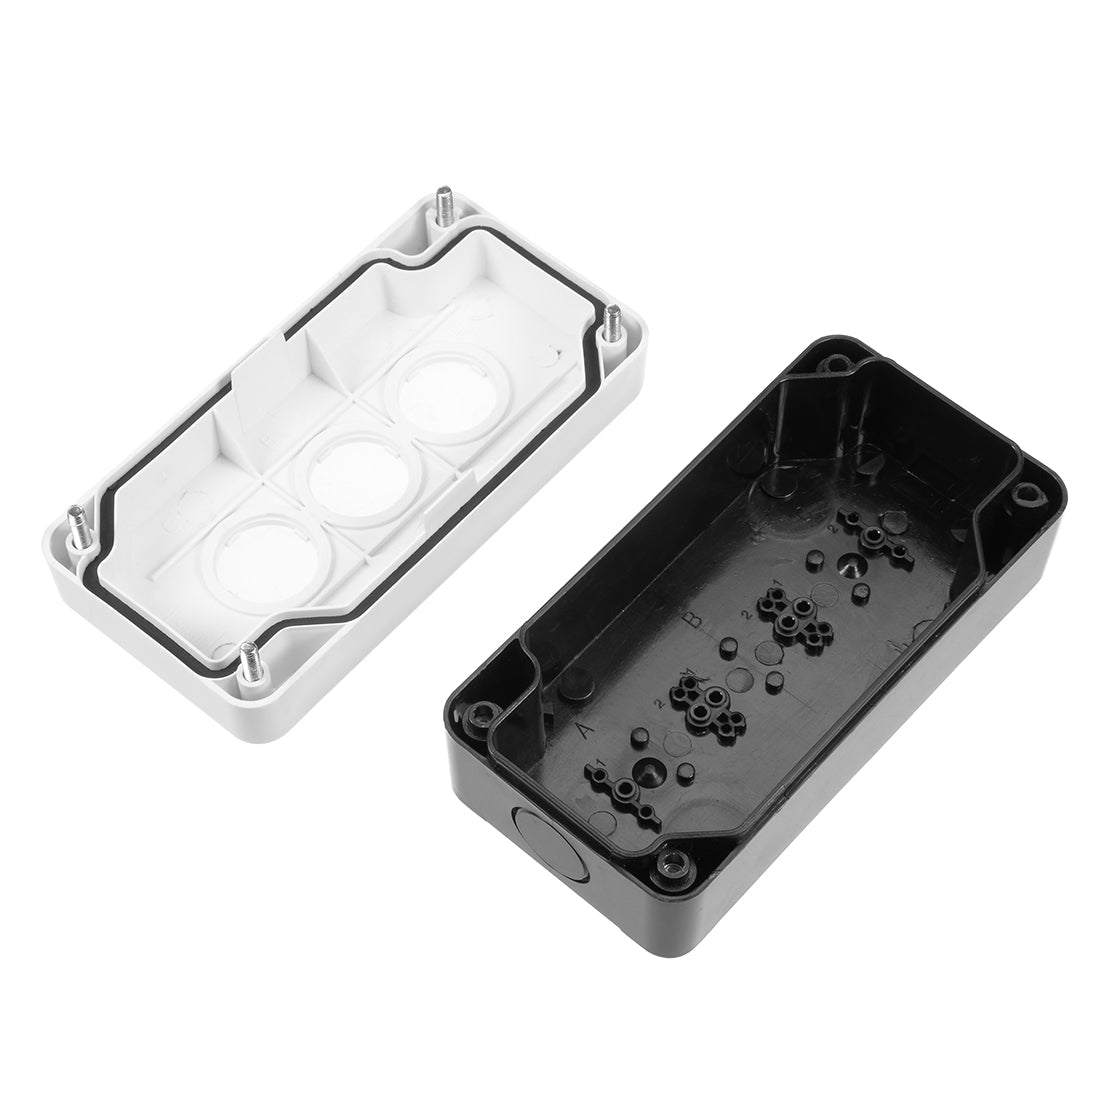 uxcell Uxcell Push Button Switch Control Station Box 22mm 3 Button Hole Watertight Black and White